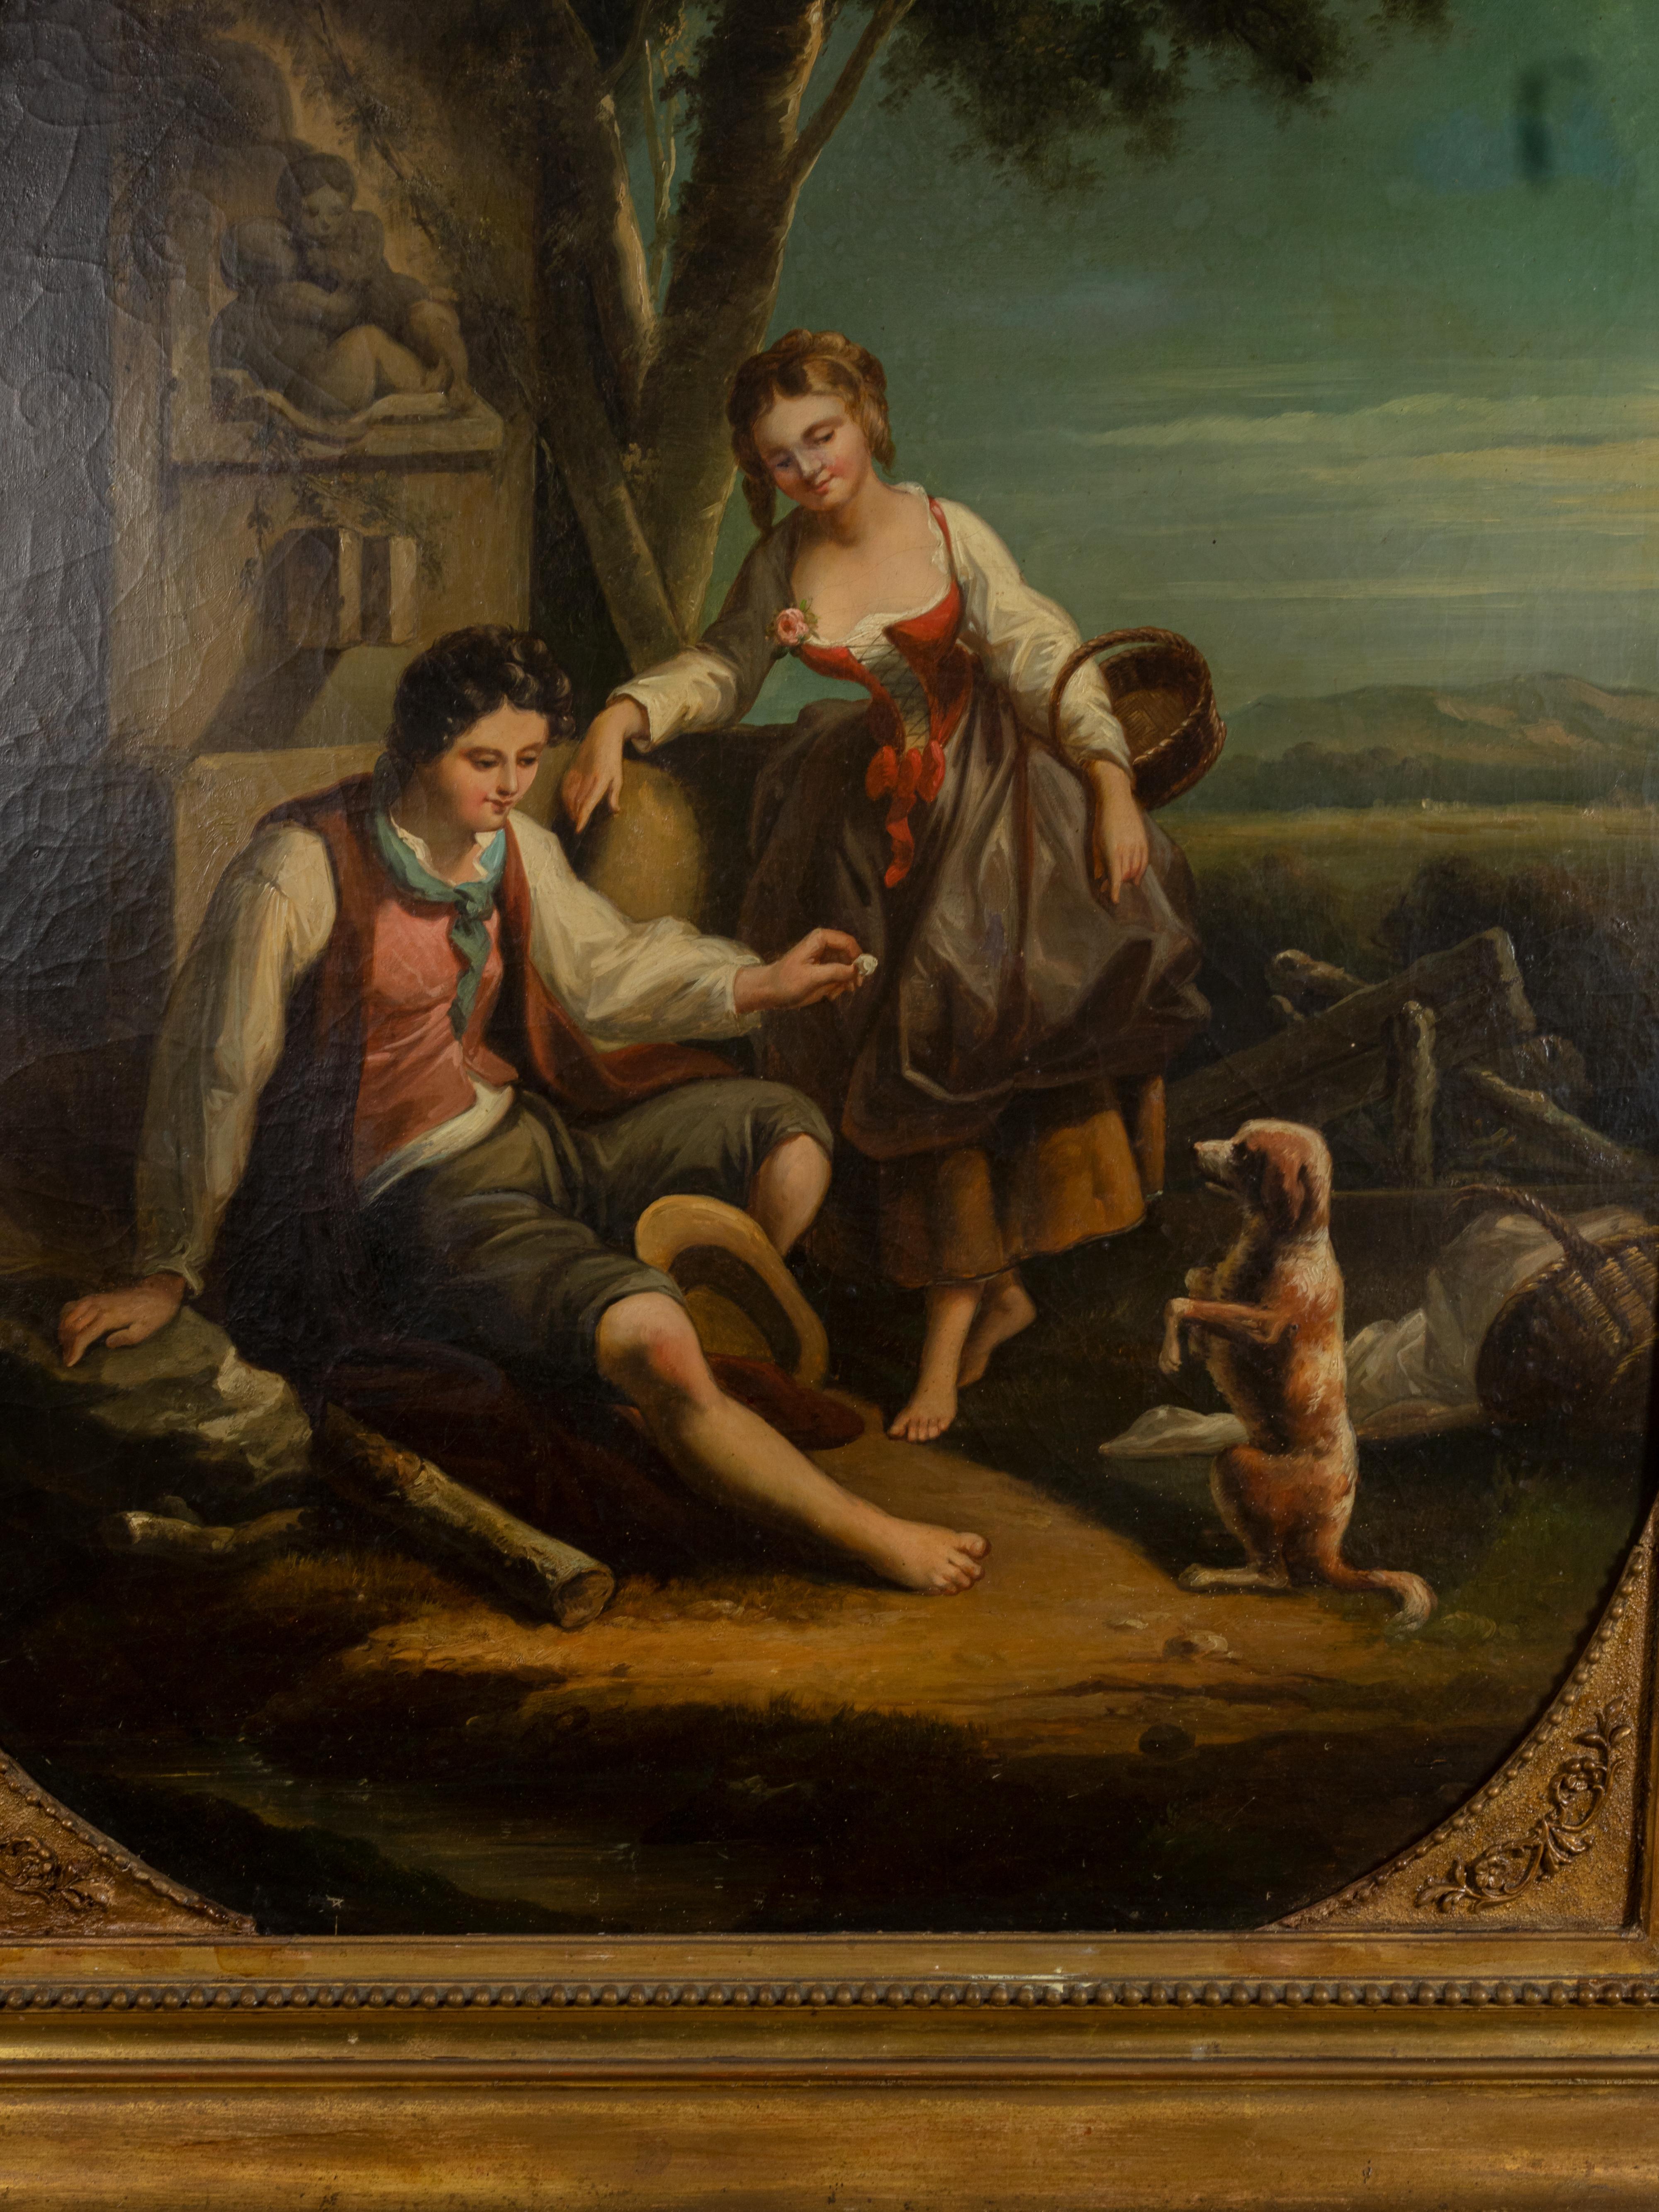 This signed 18th Century painting showcases a beautiful scene of a loving man and woman and their loyal canine companion gathered around a charming fountain, executed in the Baroque style, specifically belonging to the Watteau School, which was